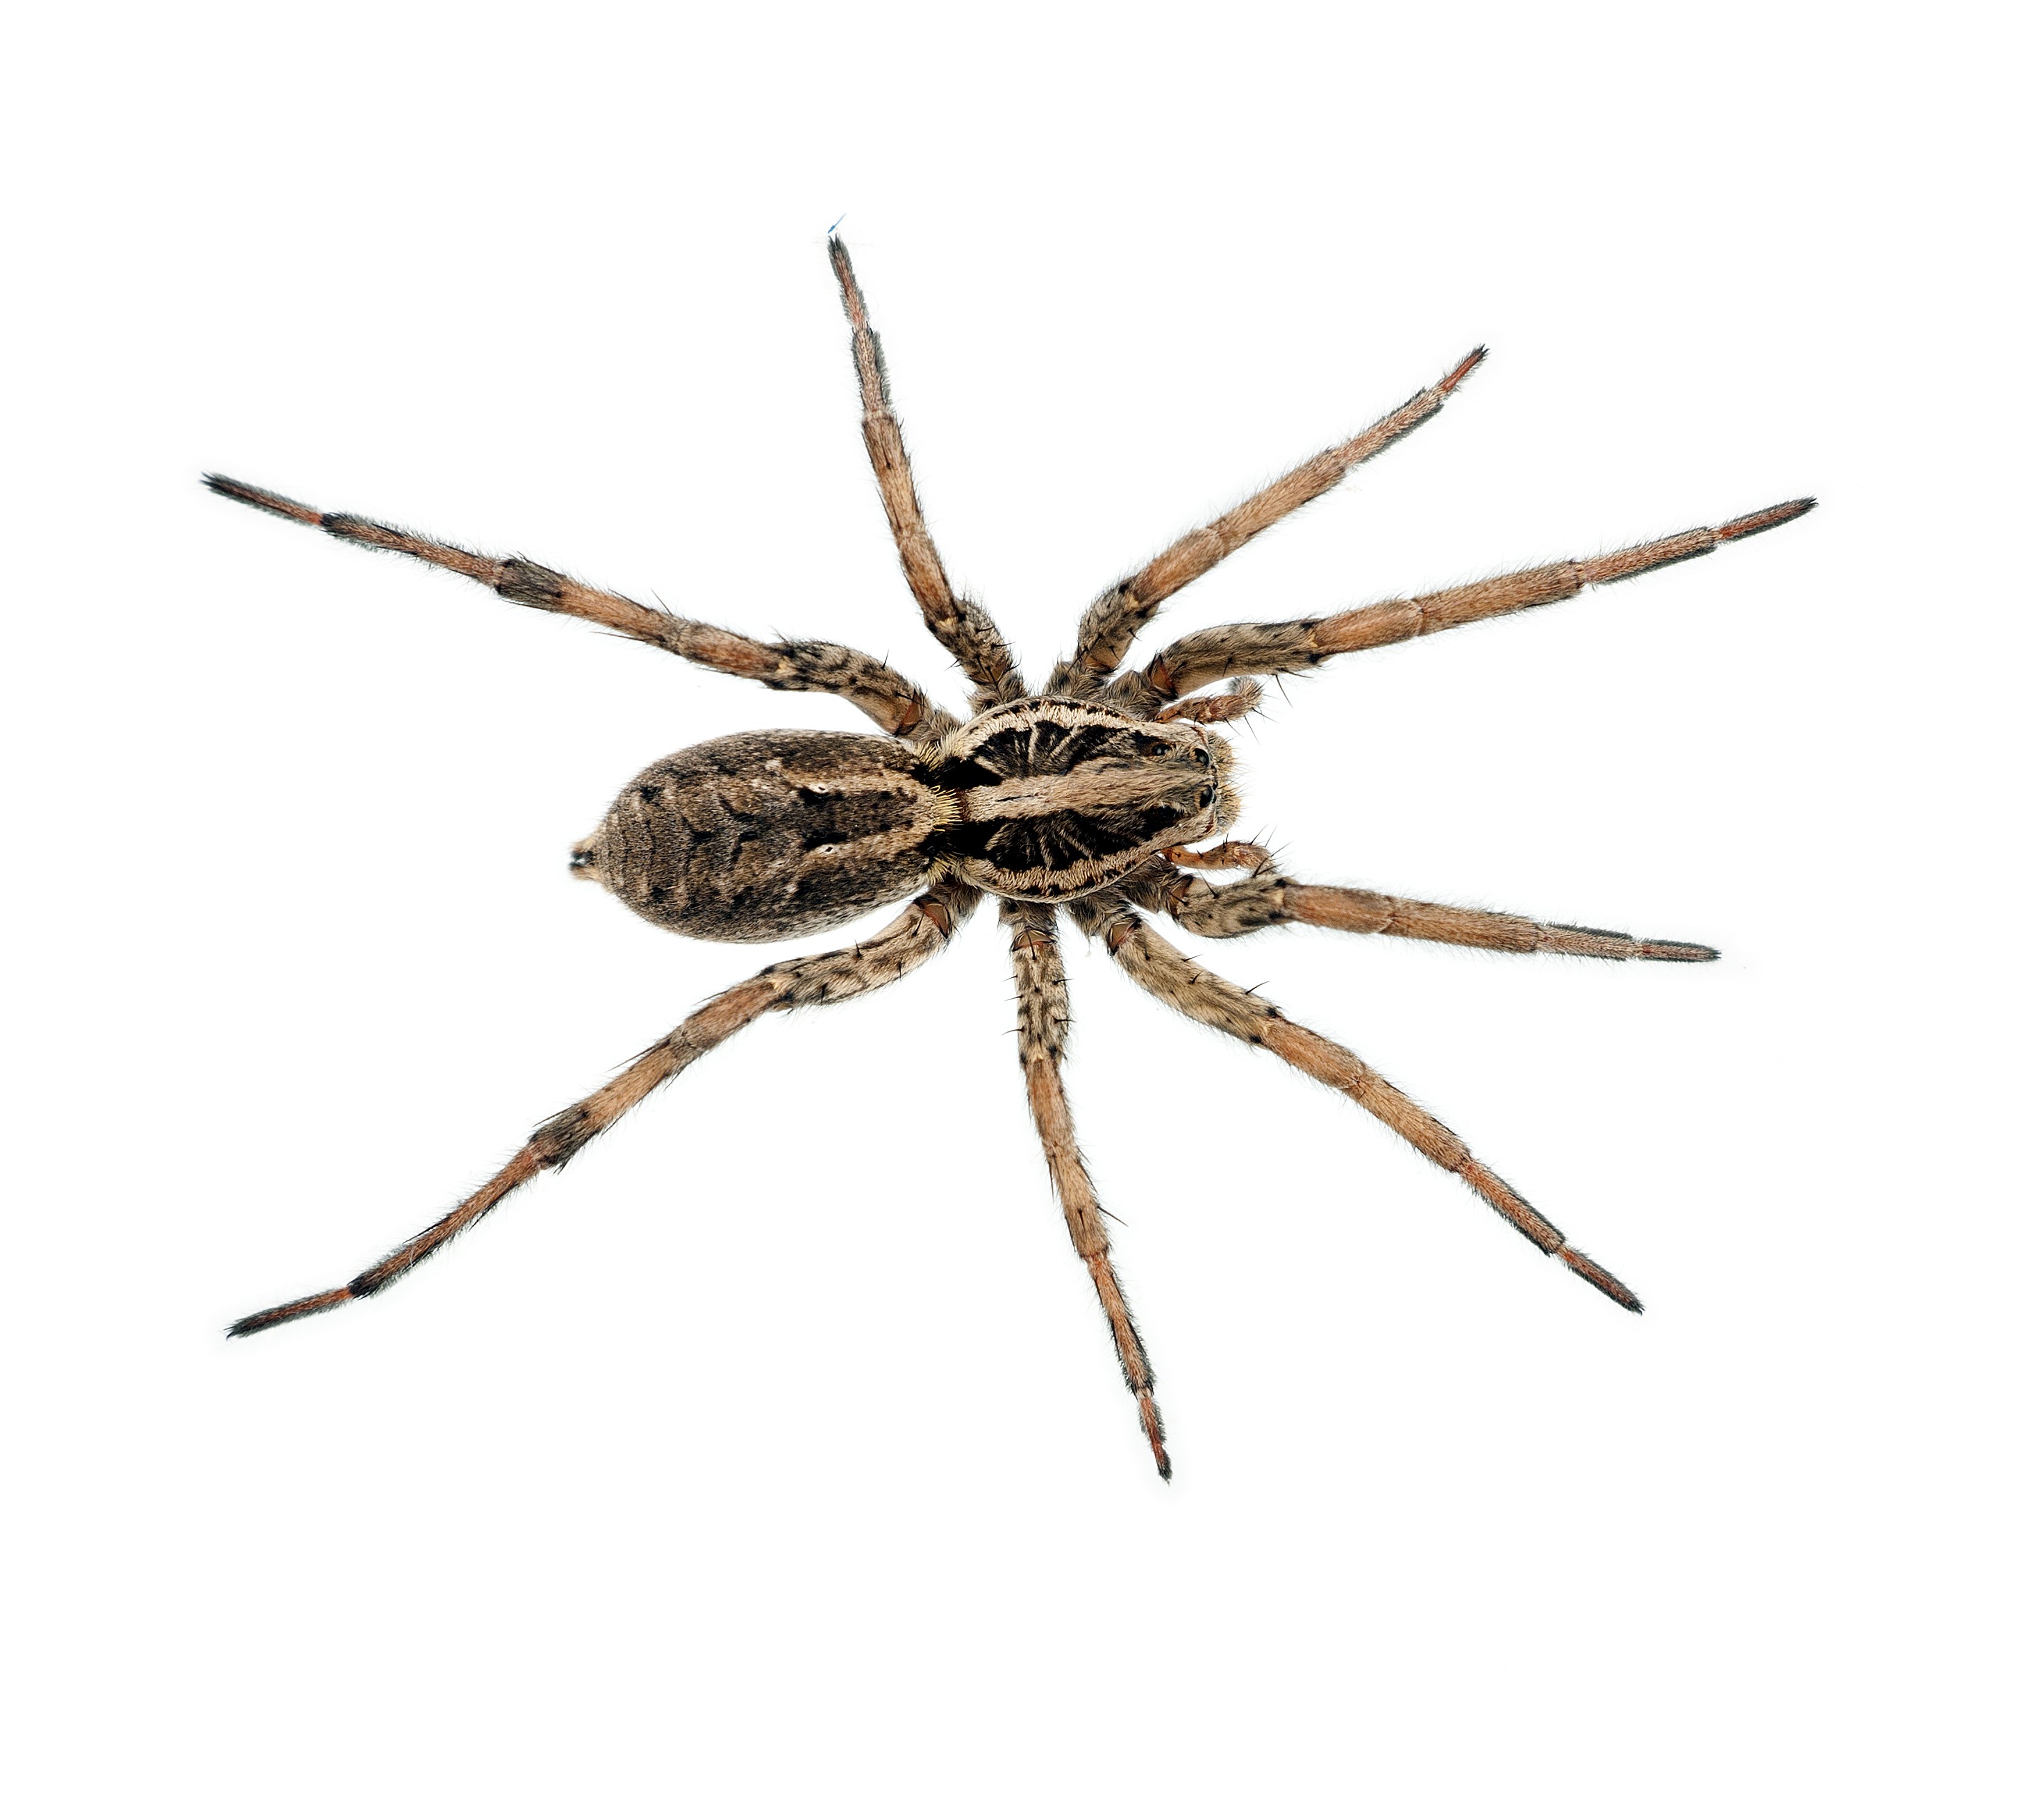 Five ways to reduce spider populations in and around your home